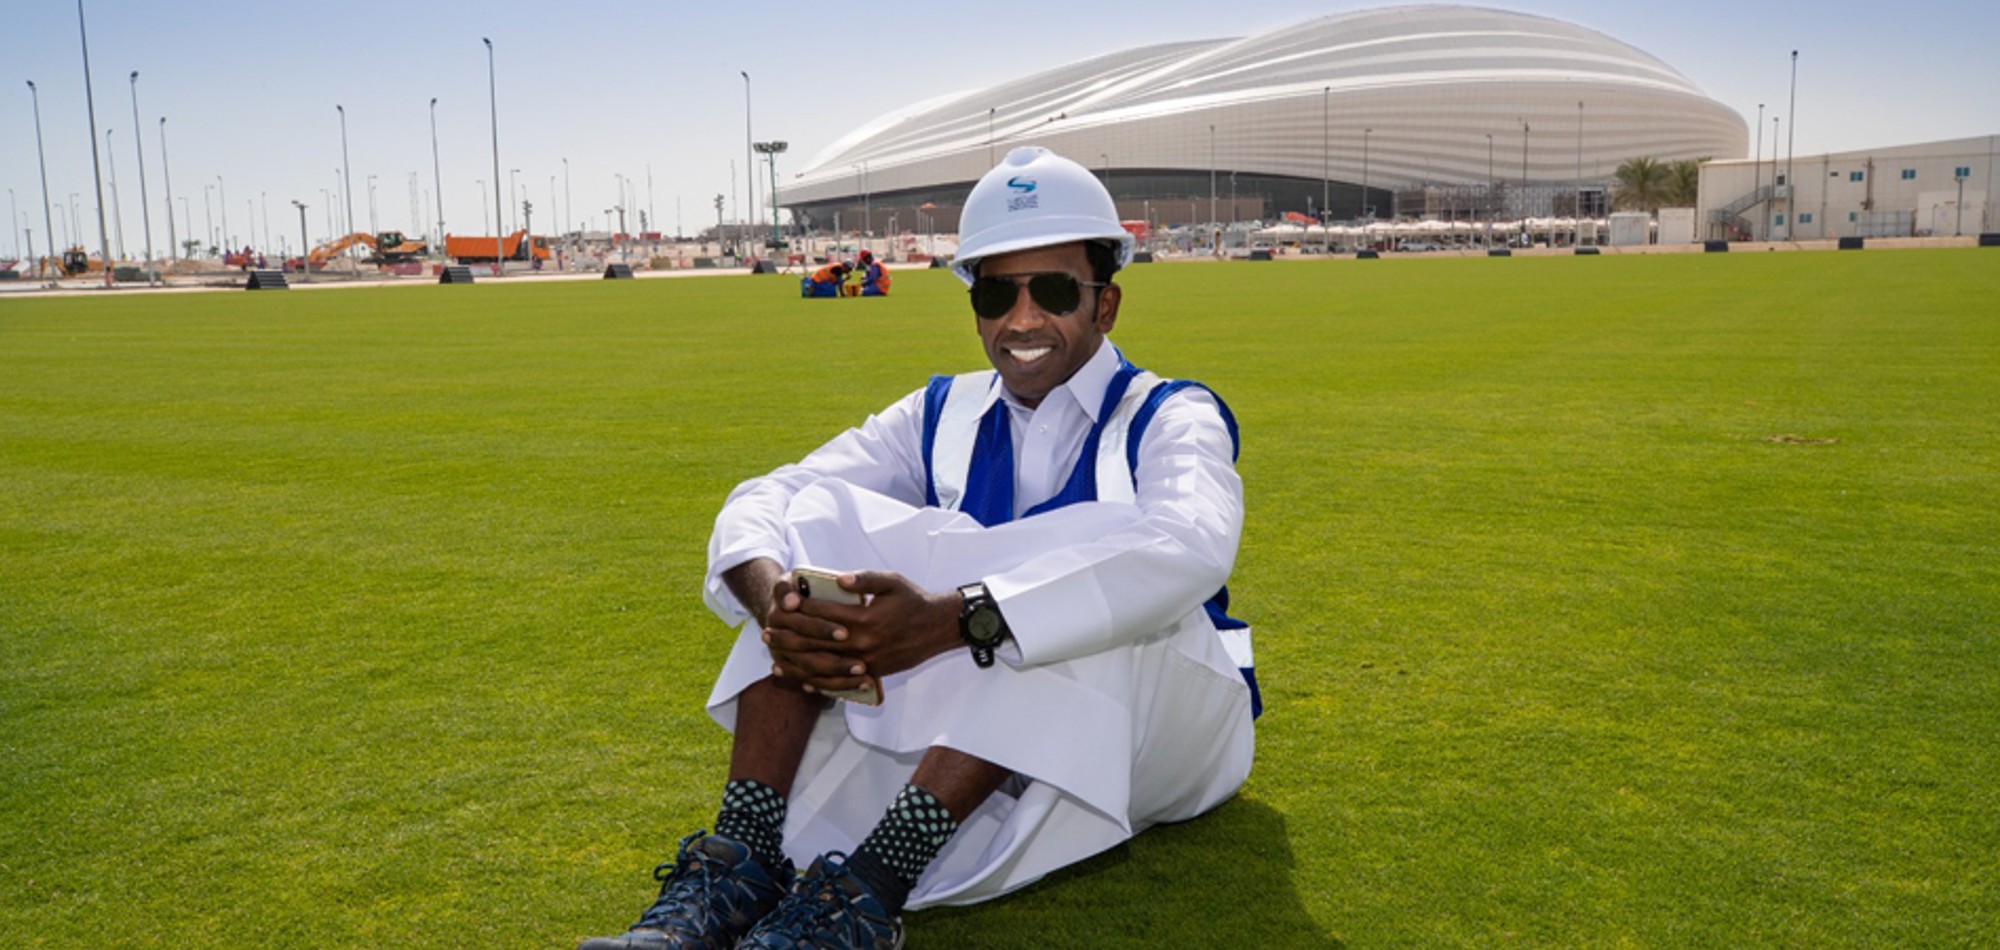 ‘The World Cup has transformed Qatar – I’m proud to be a part of it’